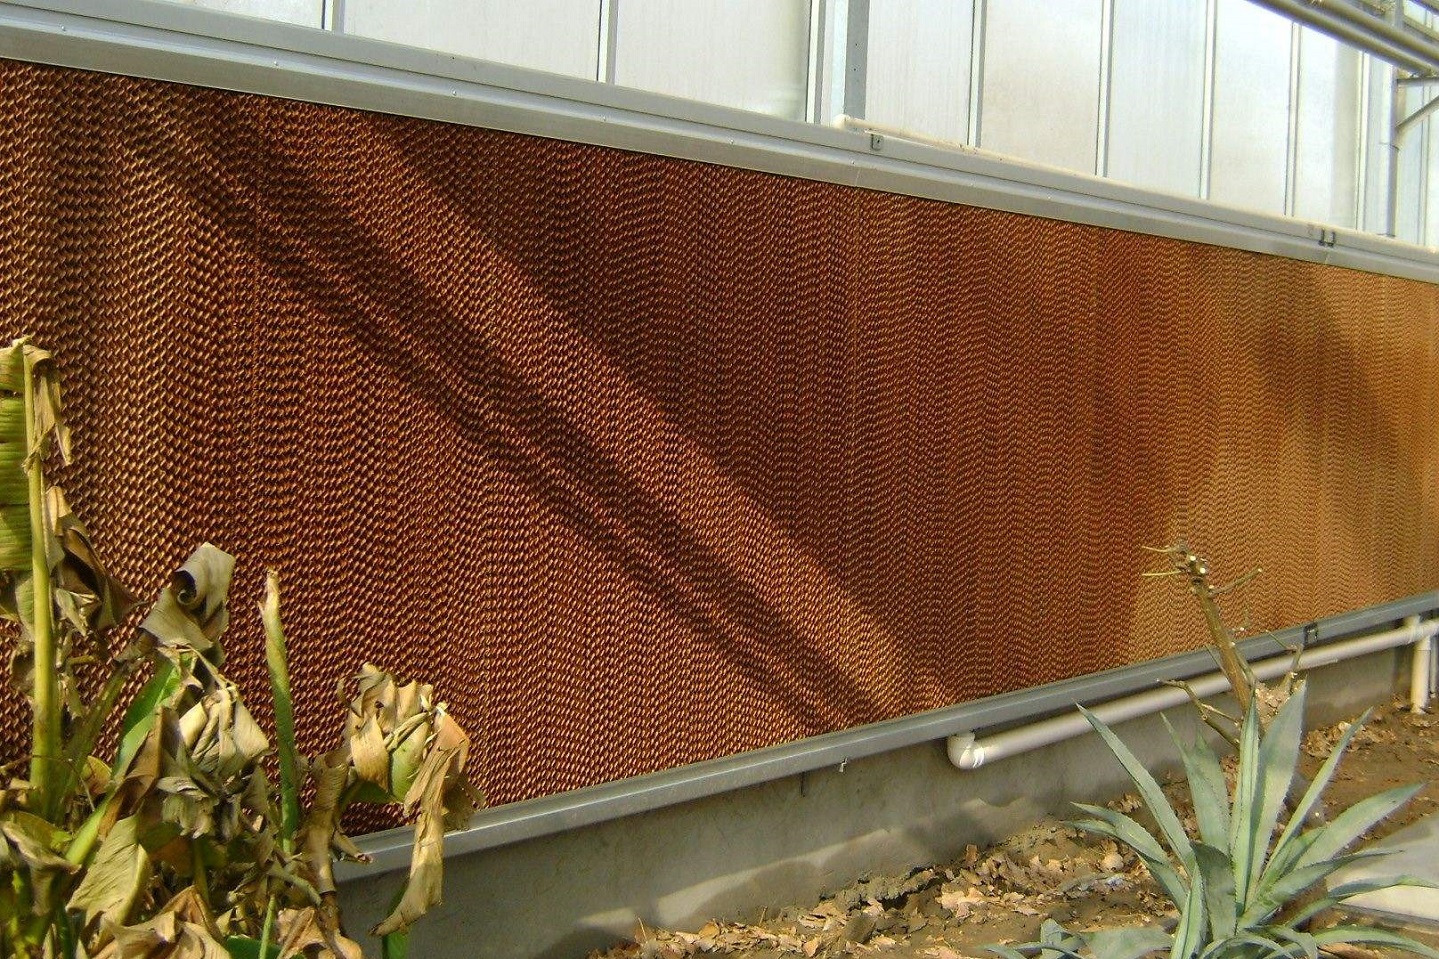 Greenhouse Water Evaporative Cooling System